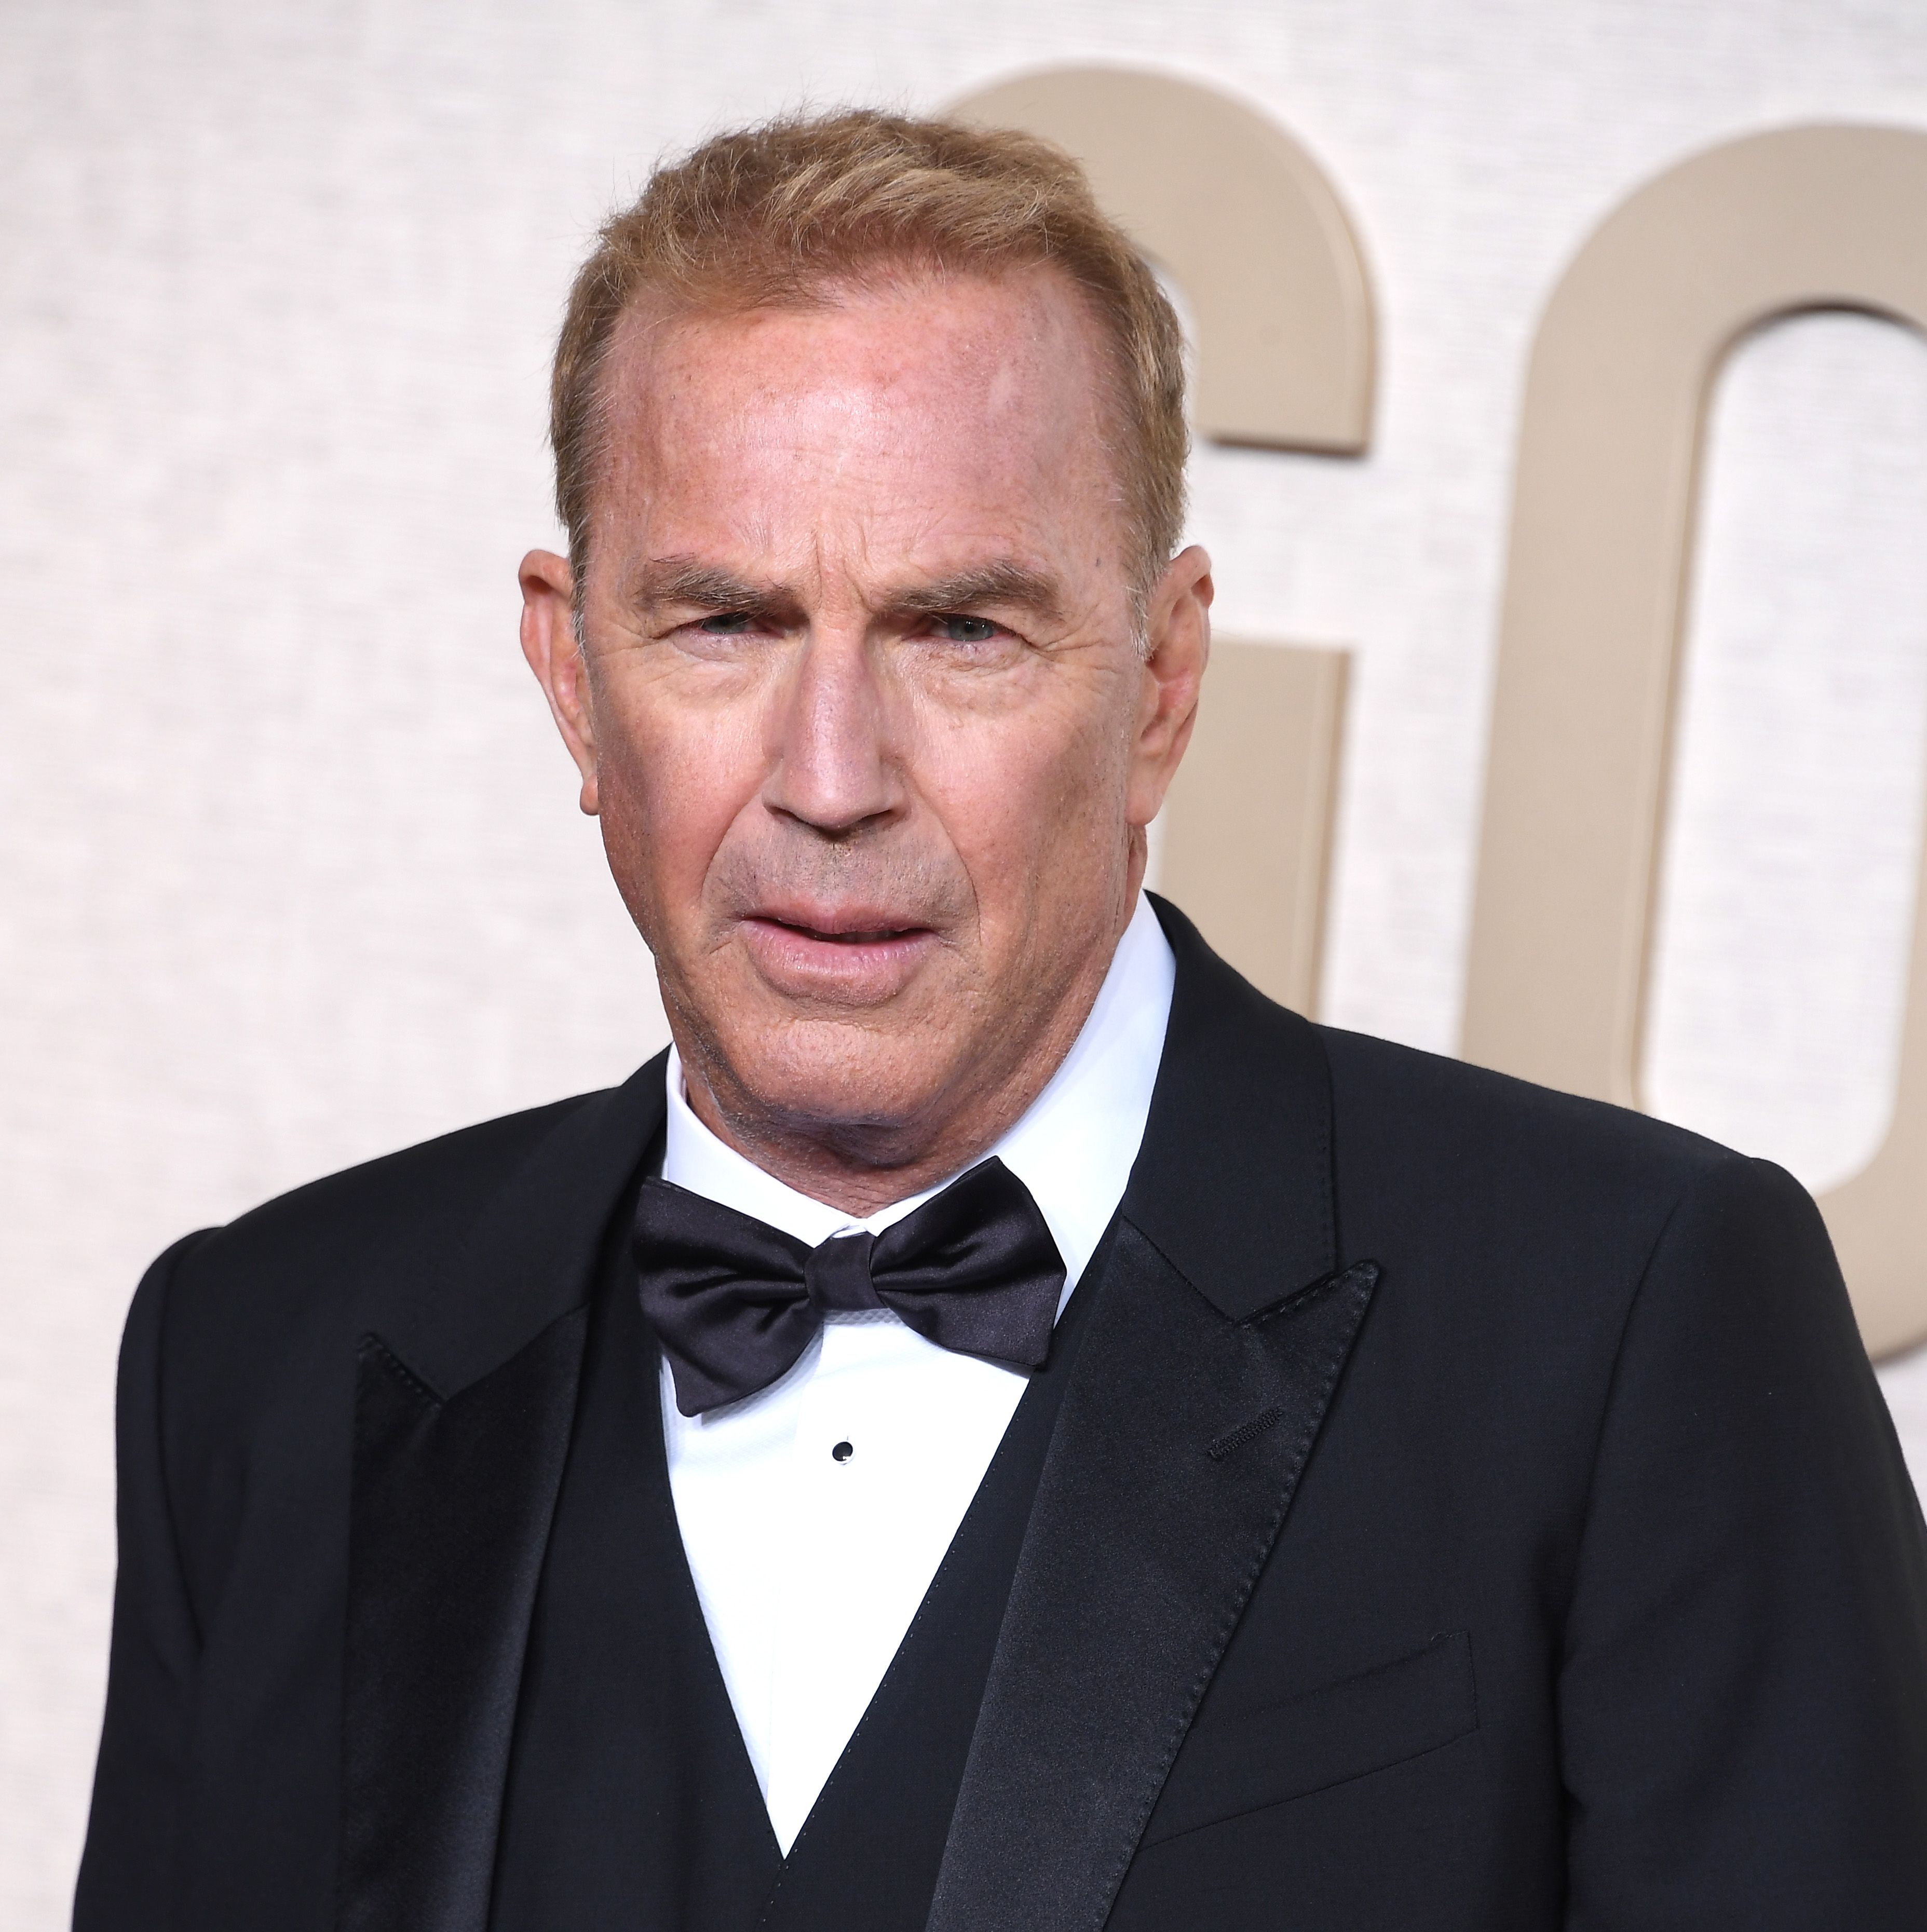 Kevin Costner Finally Shared His (Full) Side of the 'Yellowstone' Story